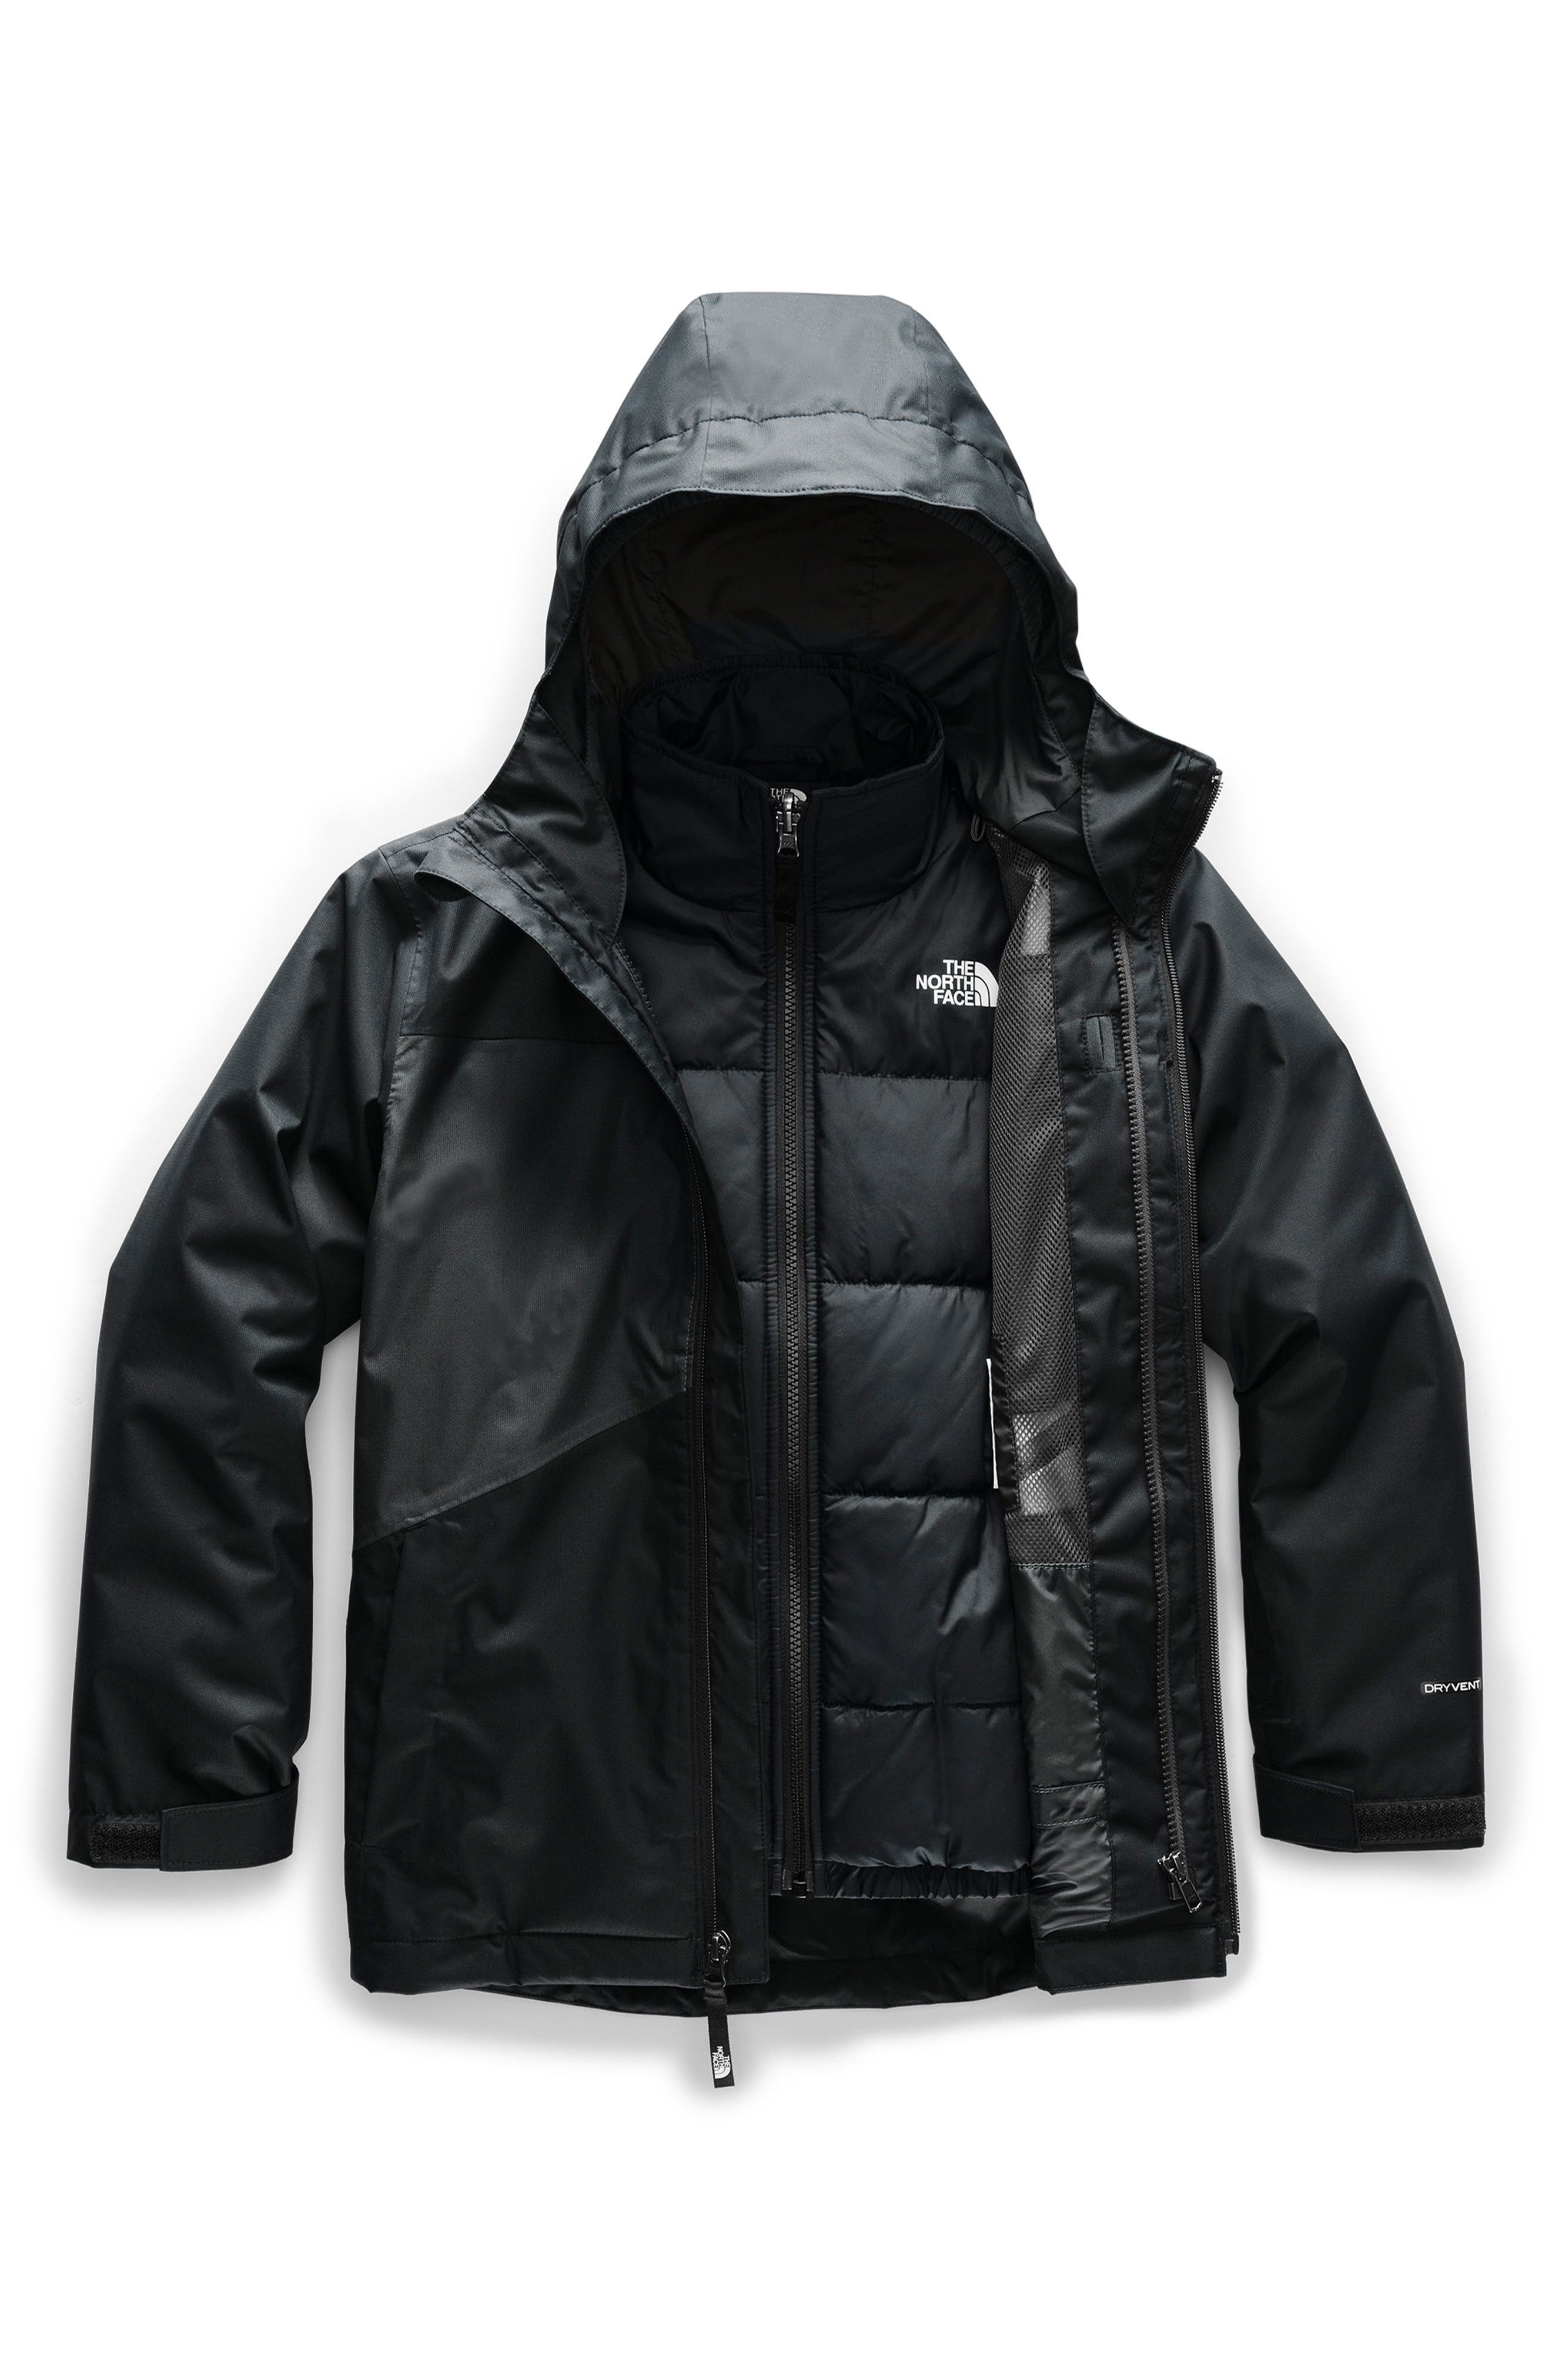 north face jacket 3 in 1